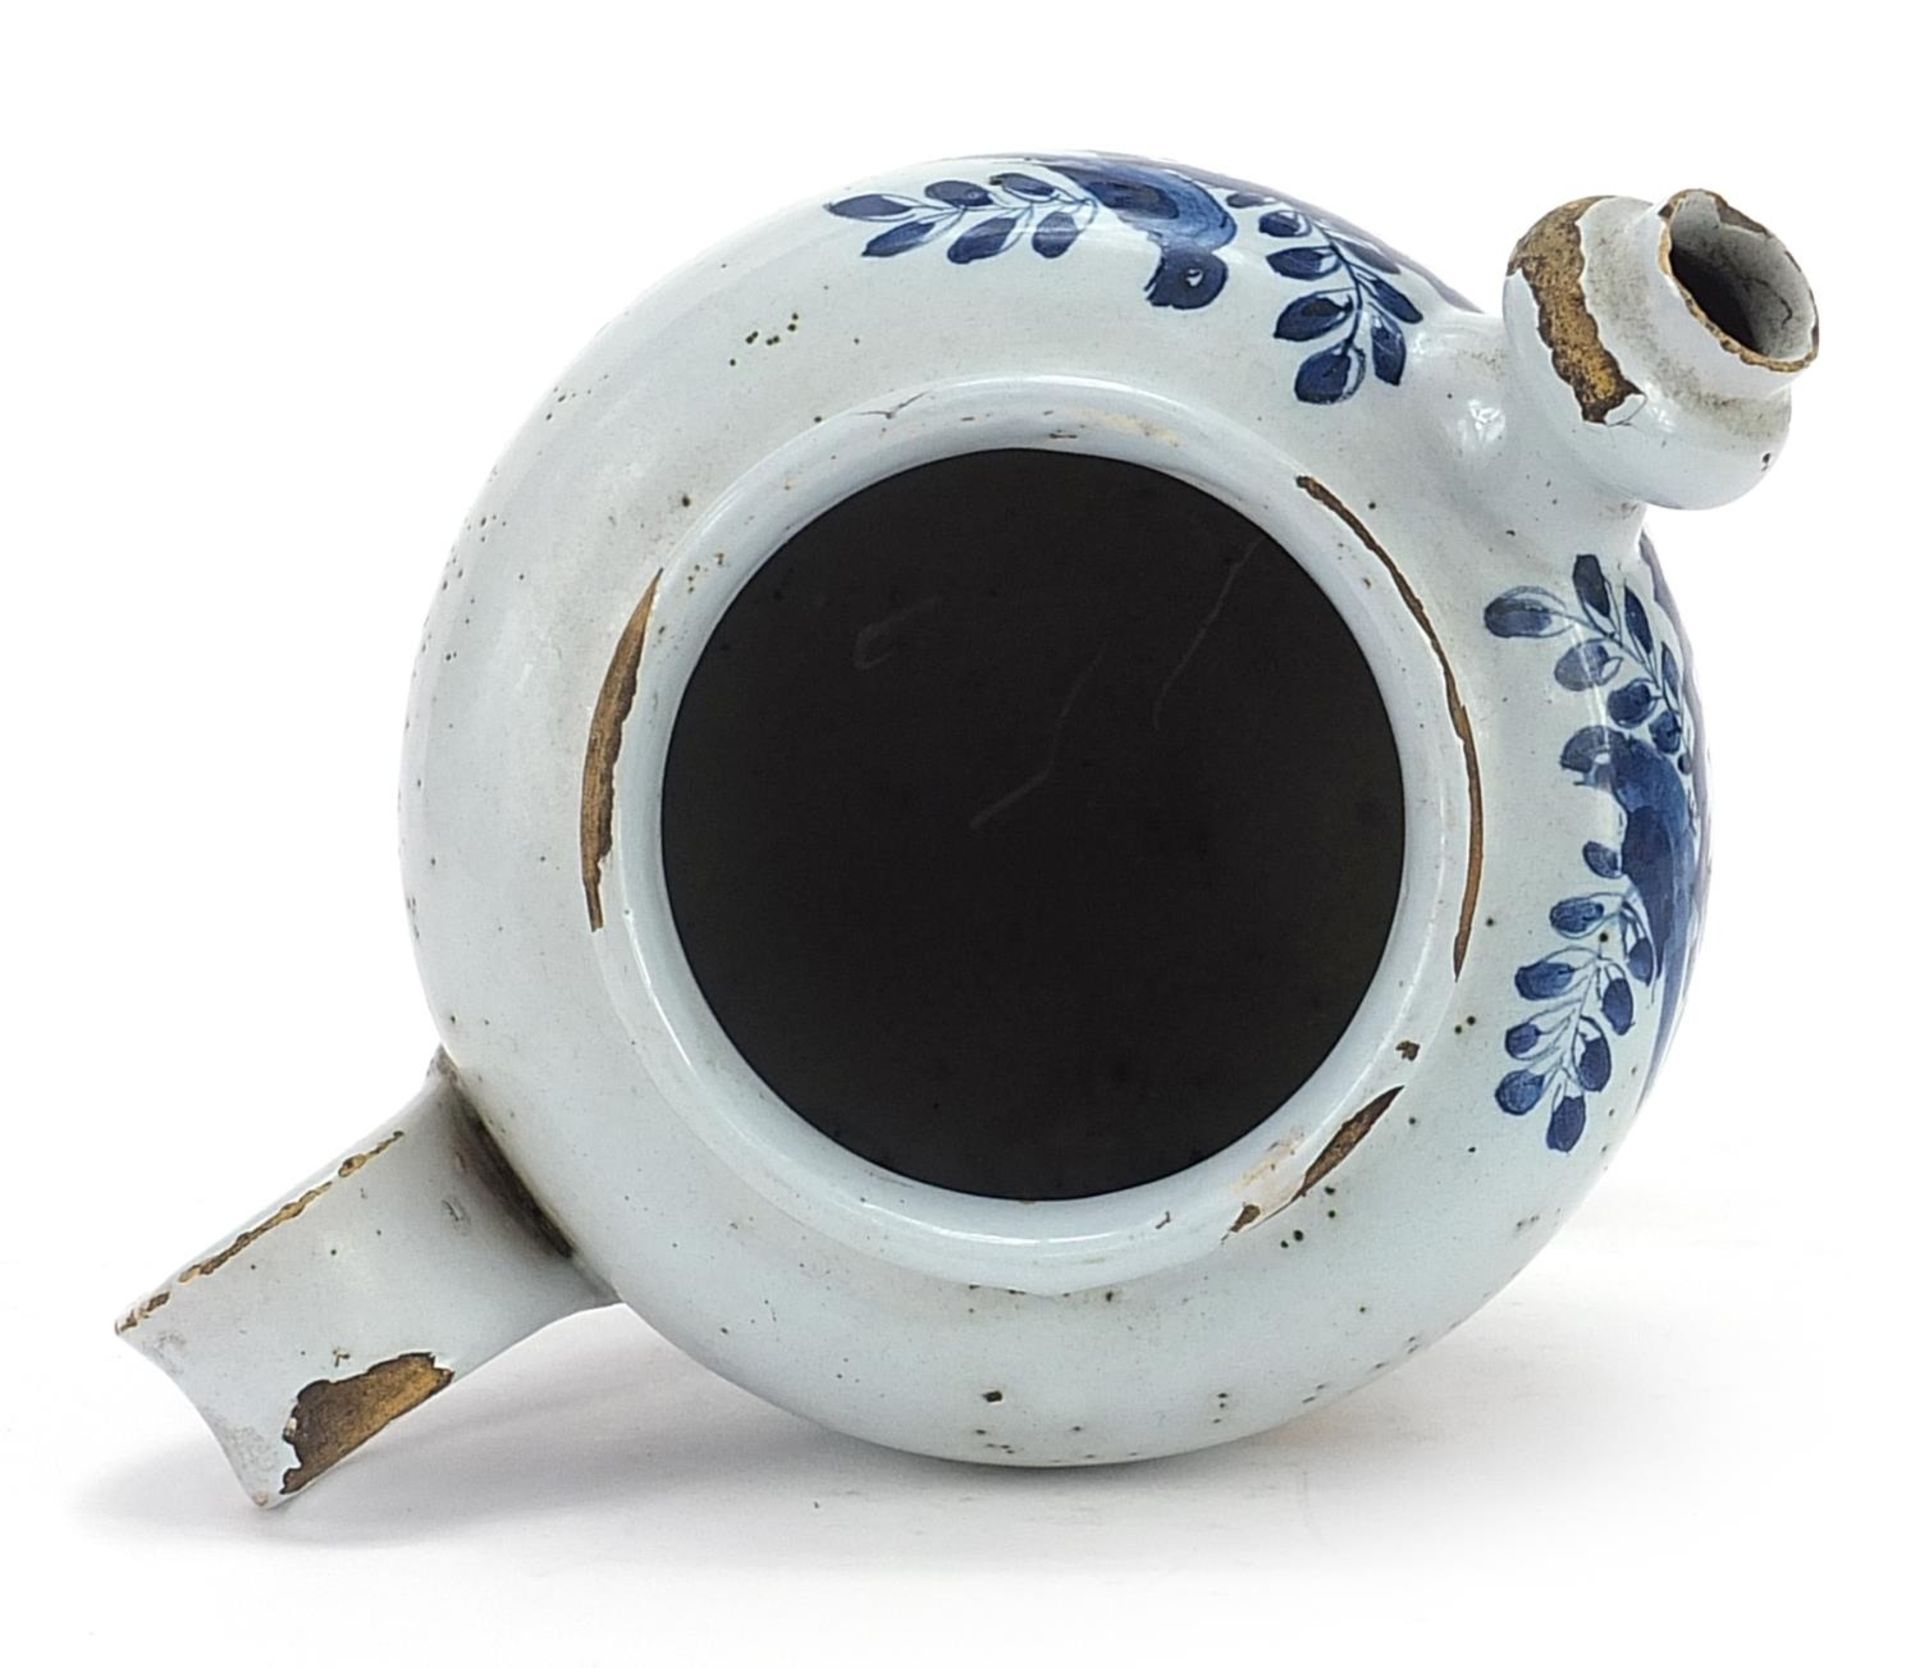 18th century Delft blue and white tin glazed drug jar with handle and spout, 18cm high - Image 3 of 4